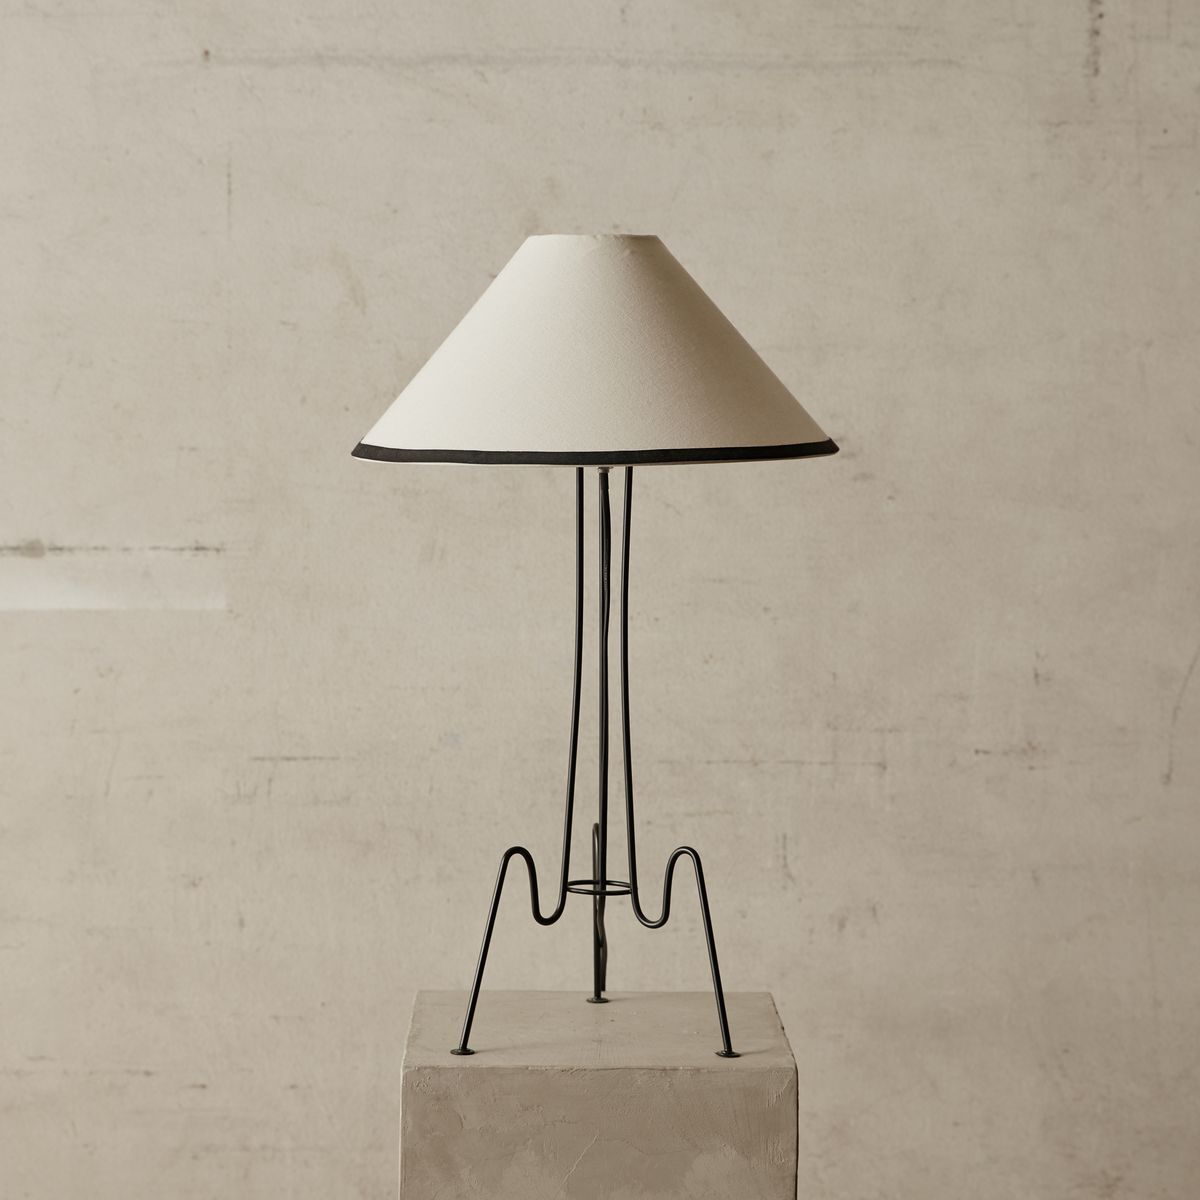 Peta Metal Black Table Lamp I McMullin & co. Floor and Table Lighting Collection